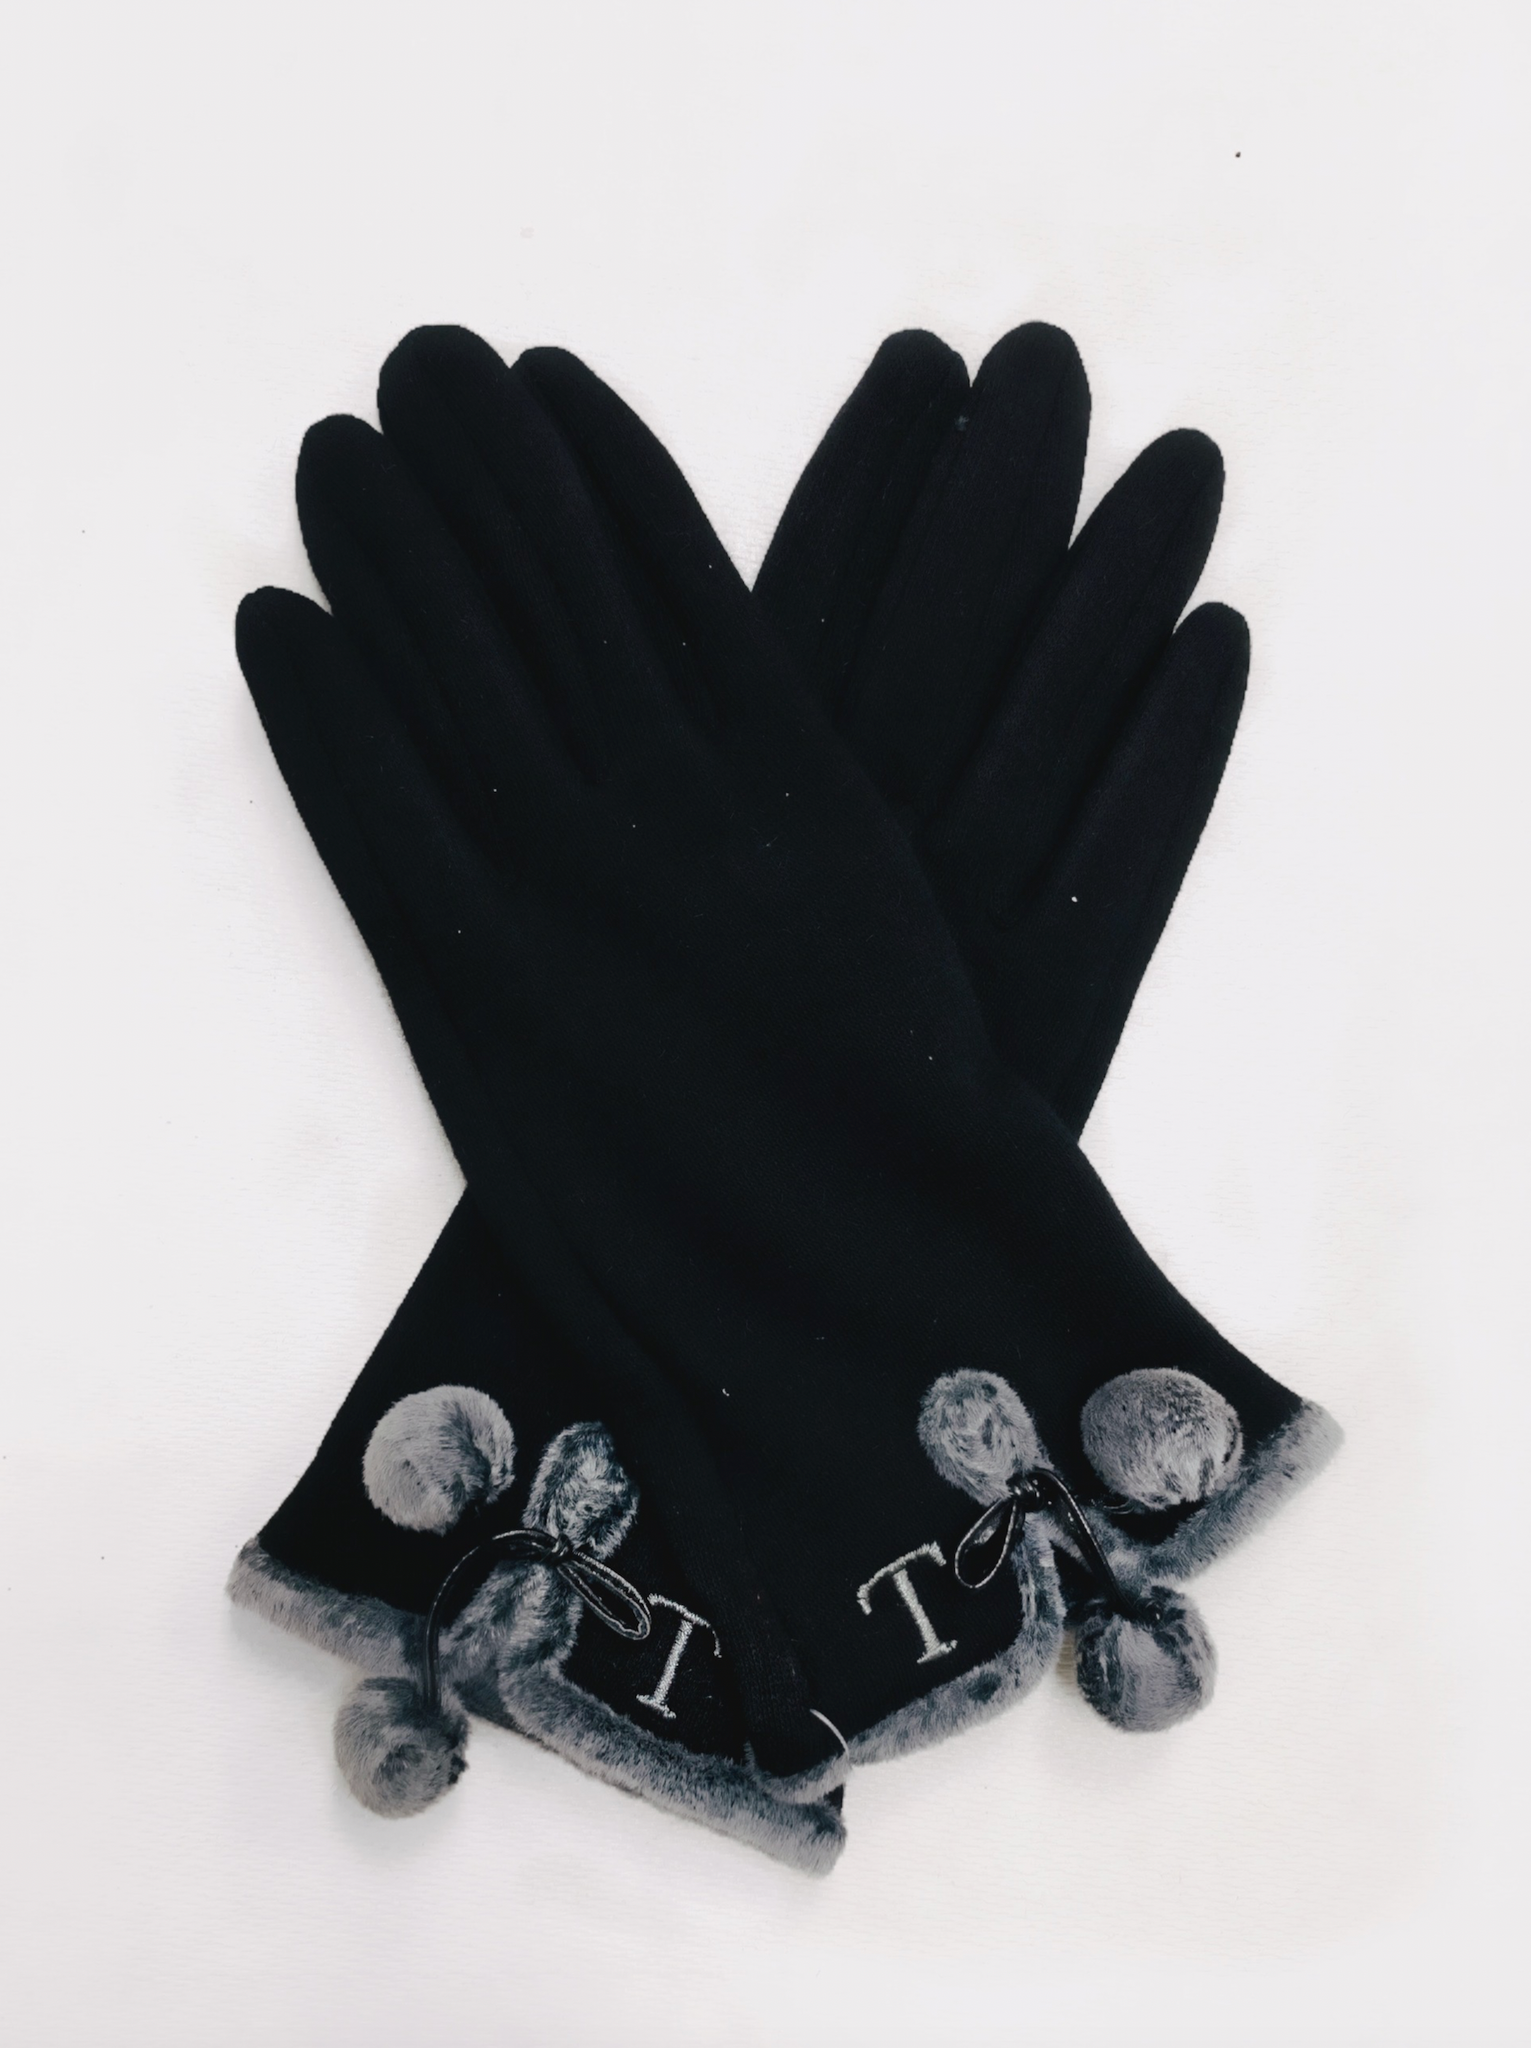 Initial Gloves